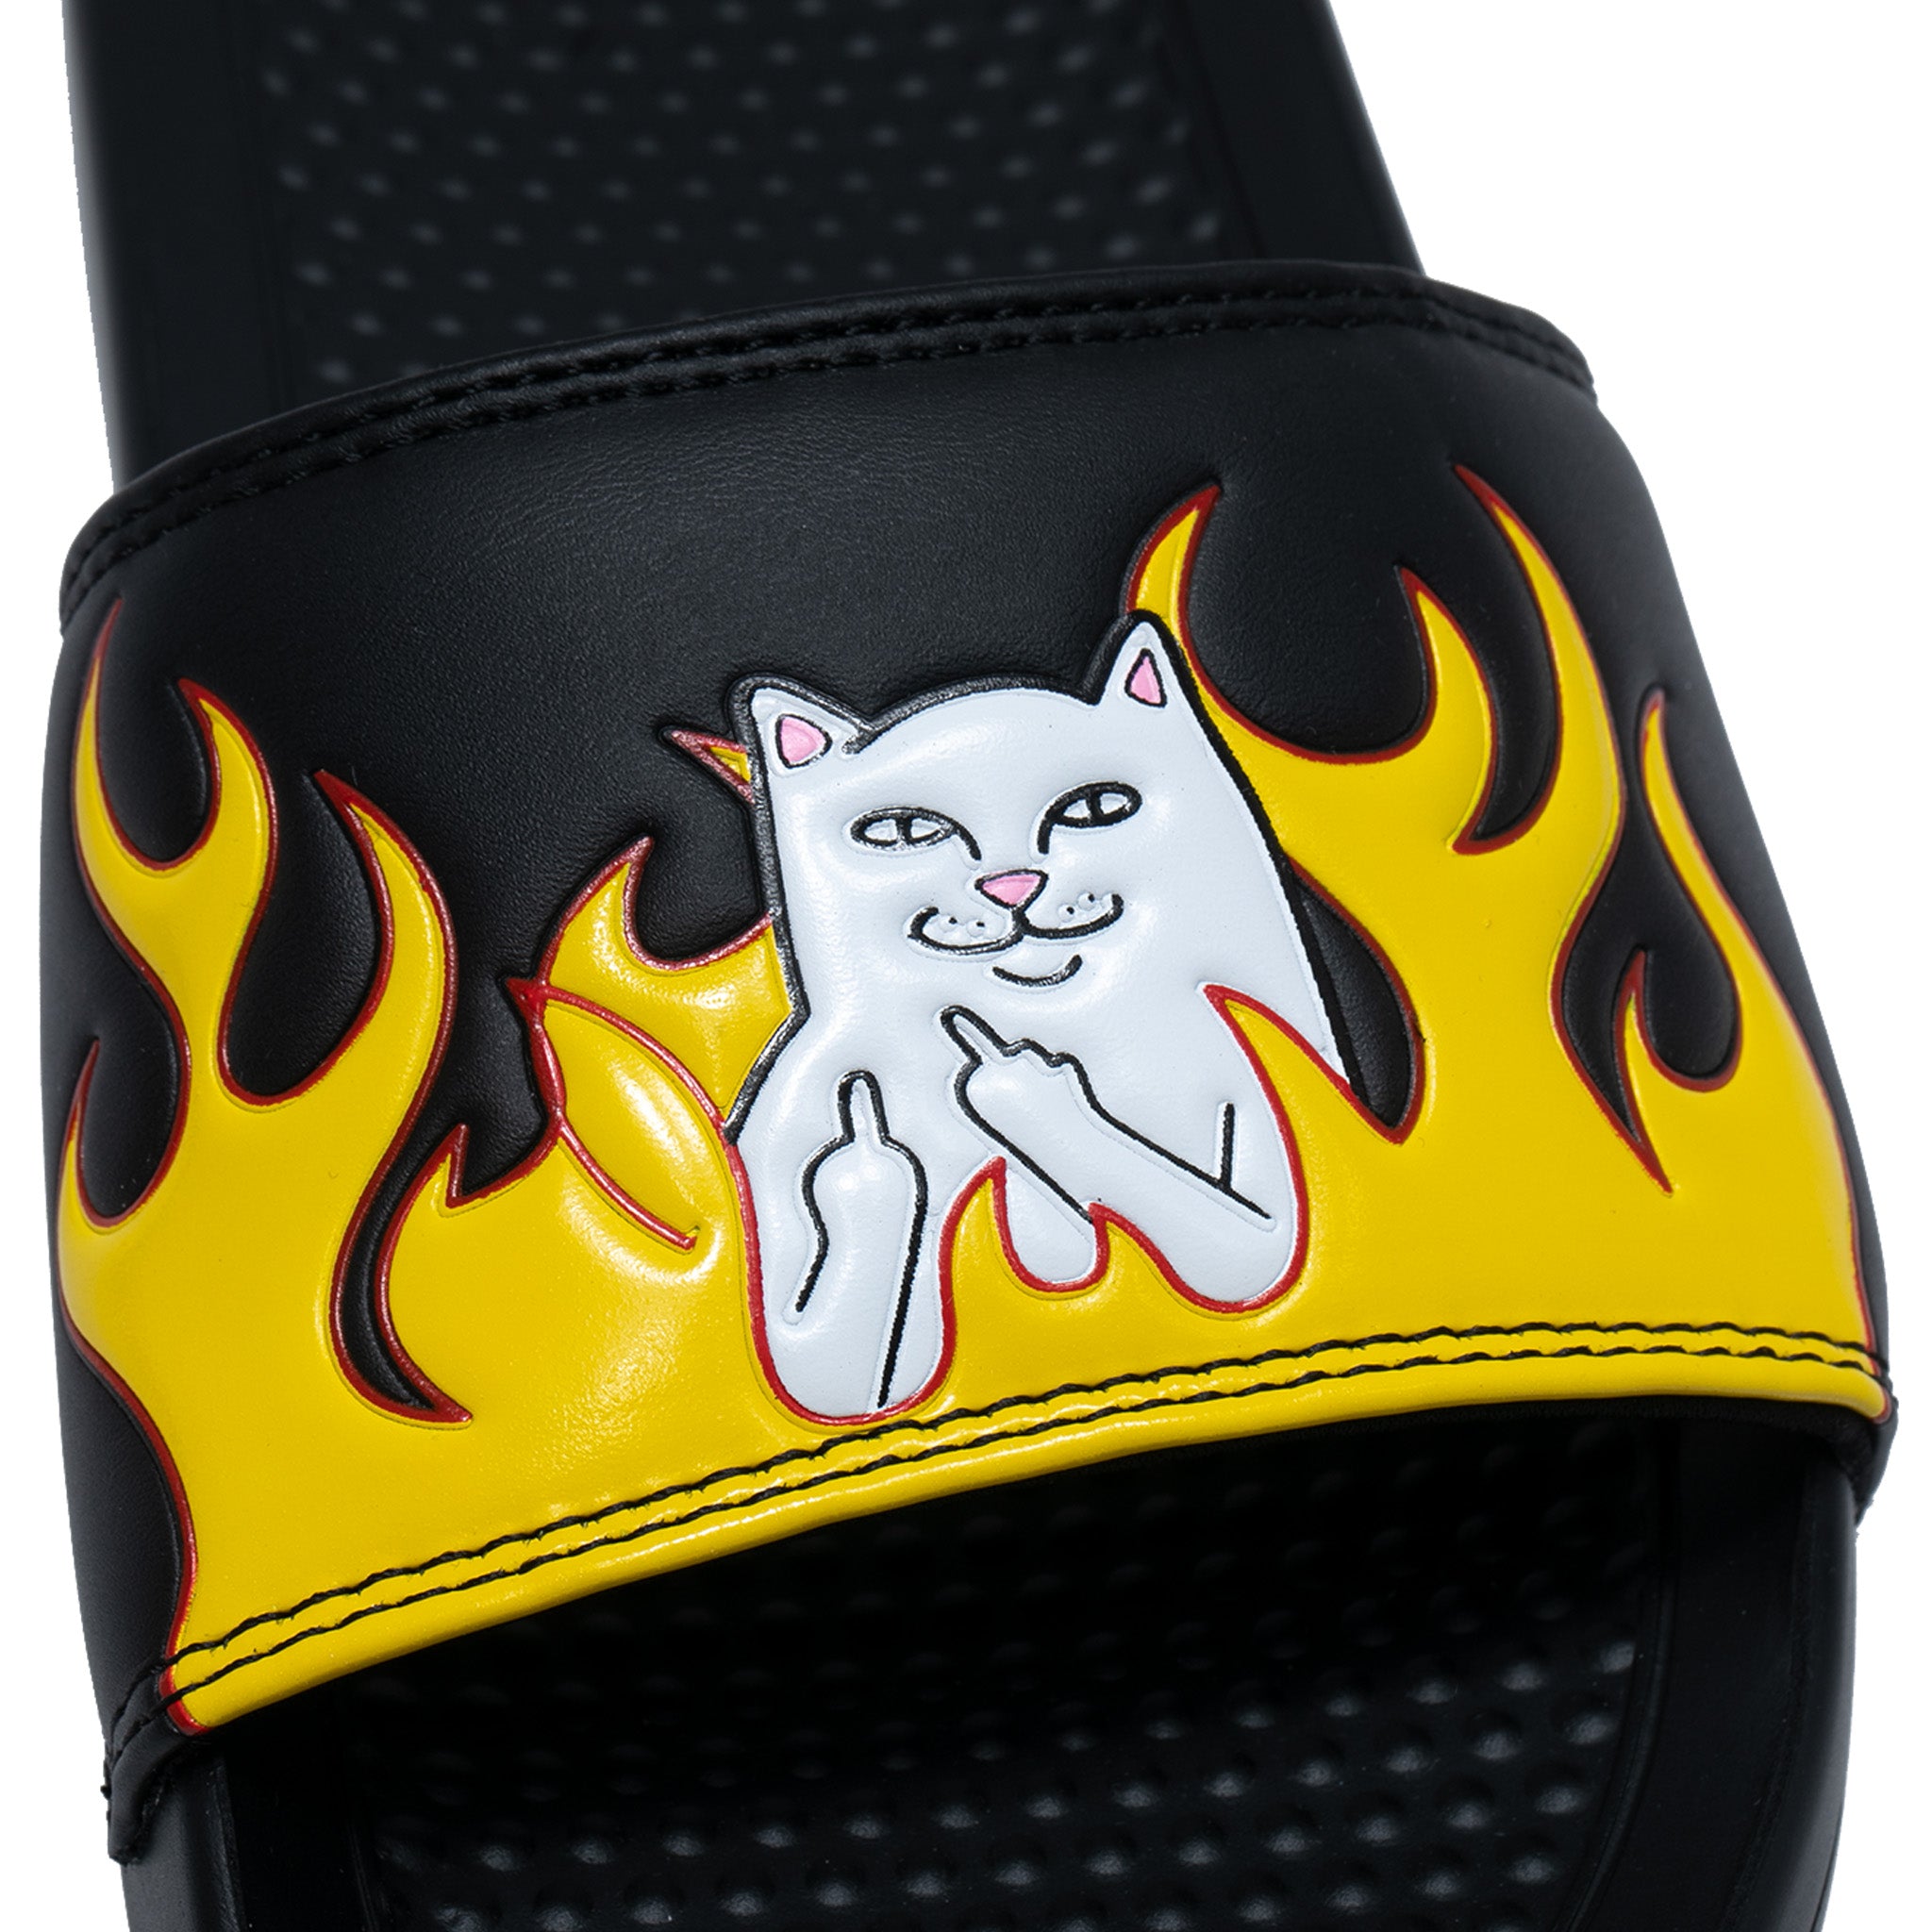 333995 Welcome To Heck Slides (Black Flame)